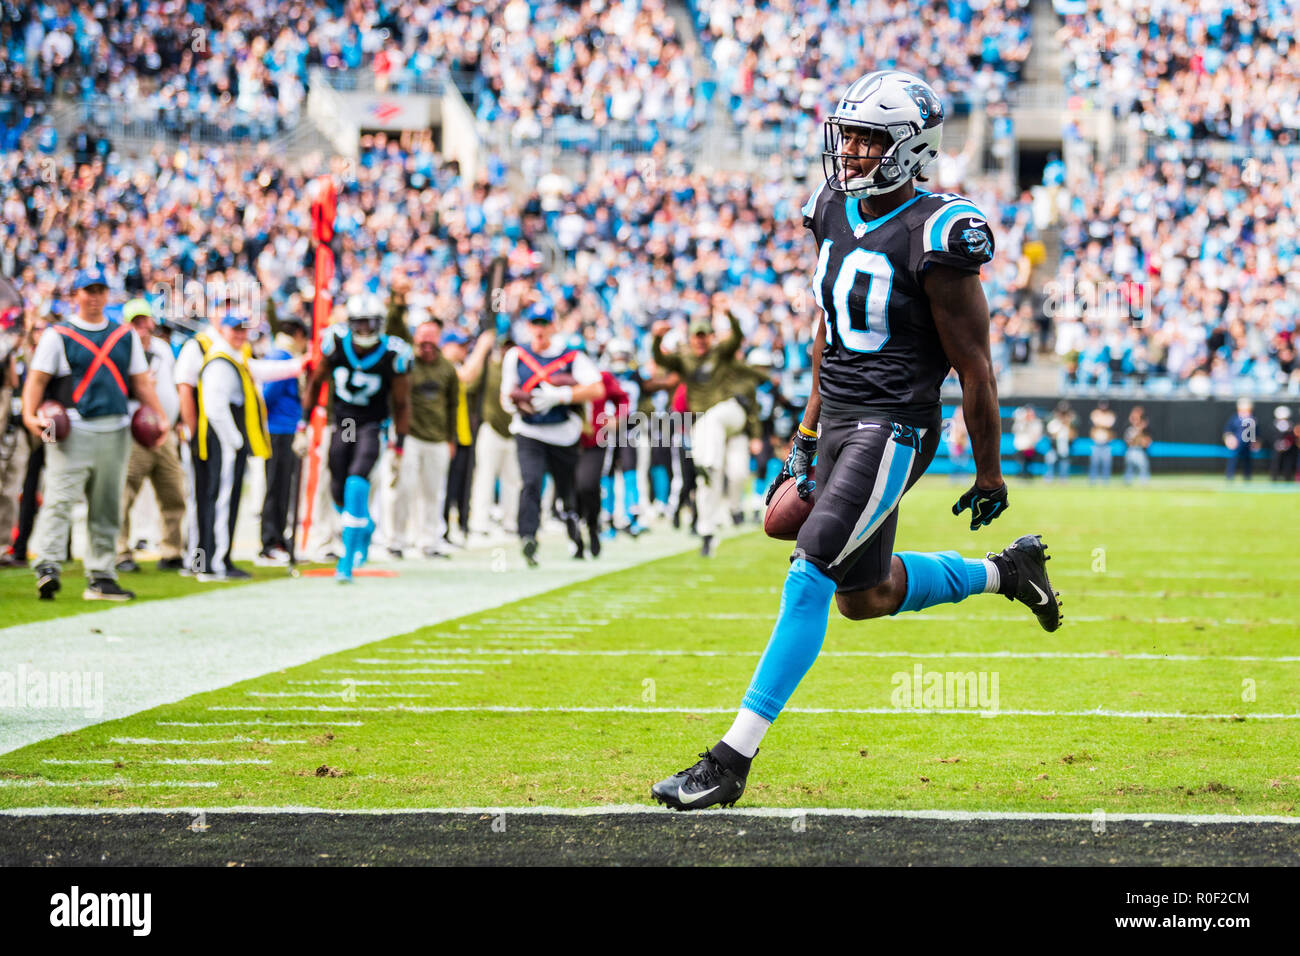 Carolina Panthers wide receiver Curtis Samuel (10) during the NFL football game between the Tampa Bay Buccaneers and the Carolina Panthers on Sunday November 4, 2018 in Charlotte, NC. Jacob Kupferman/CSM Stock Photo